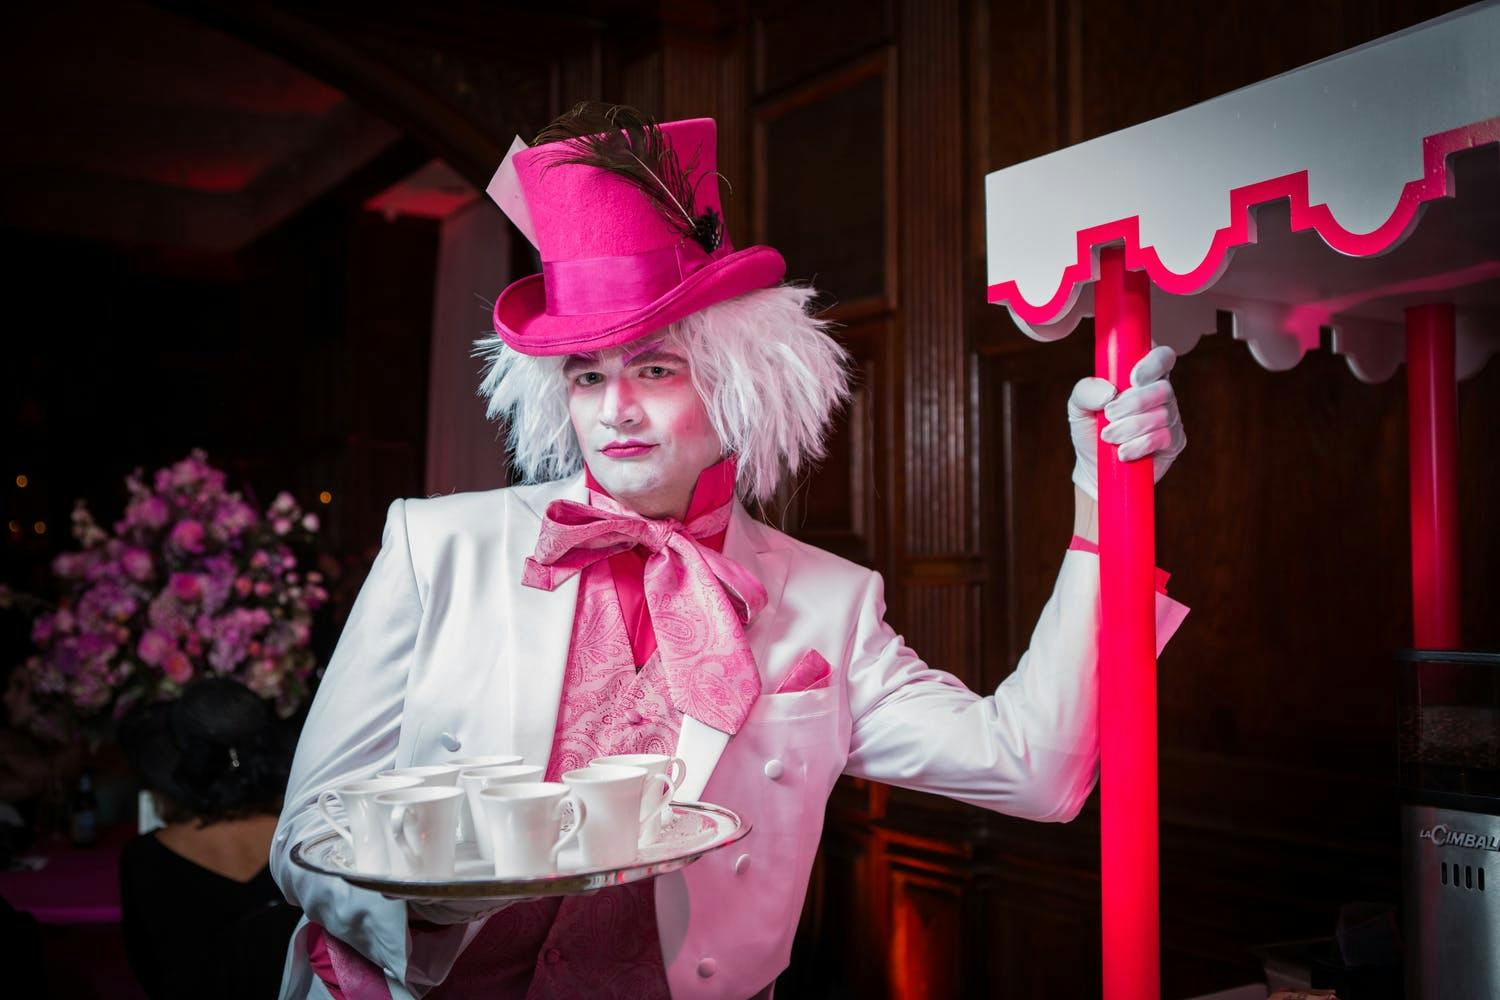 Disney-Themed Wedding With Mad Hatter Serving Tea | PartySlate